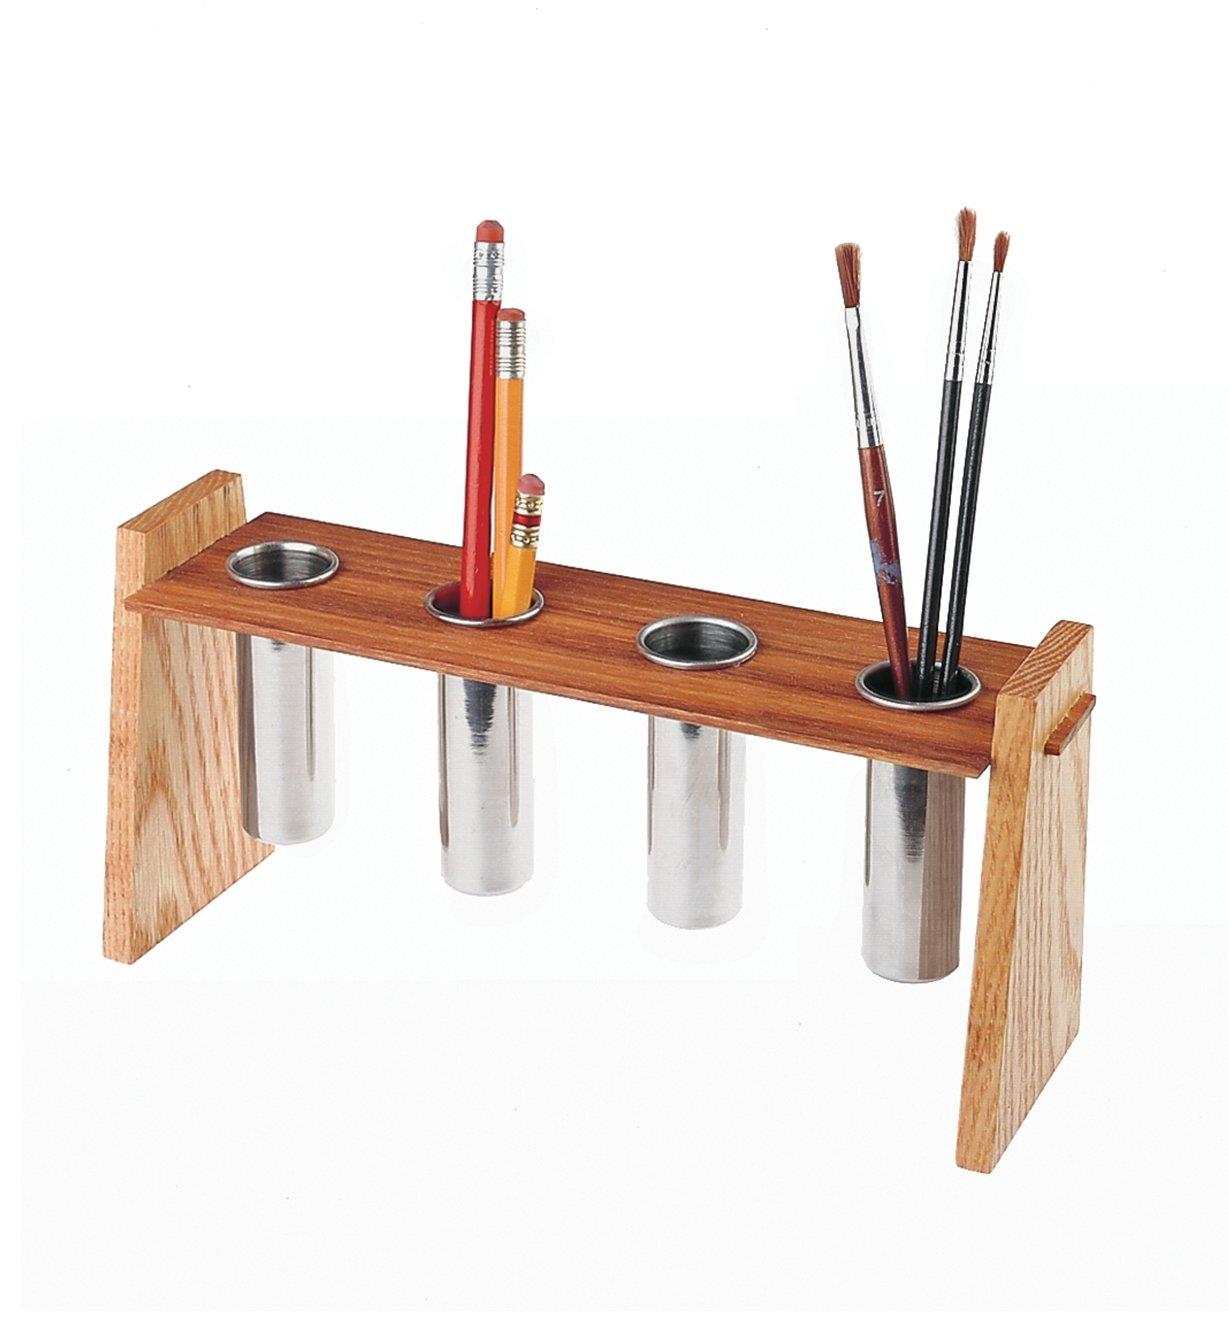 Stainless-Steel Inserts used in a wooden stand for holding pencils and paintbrushes